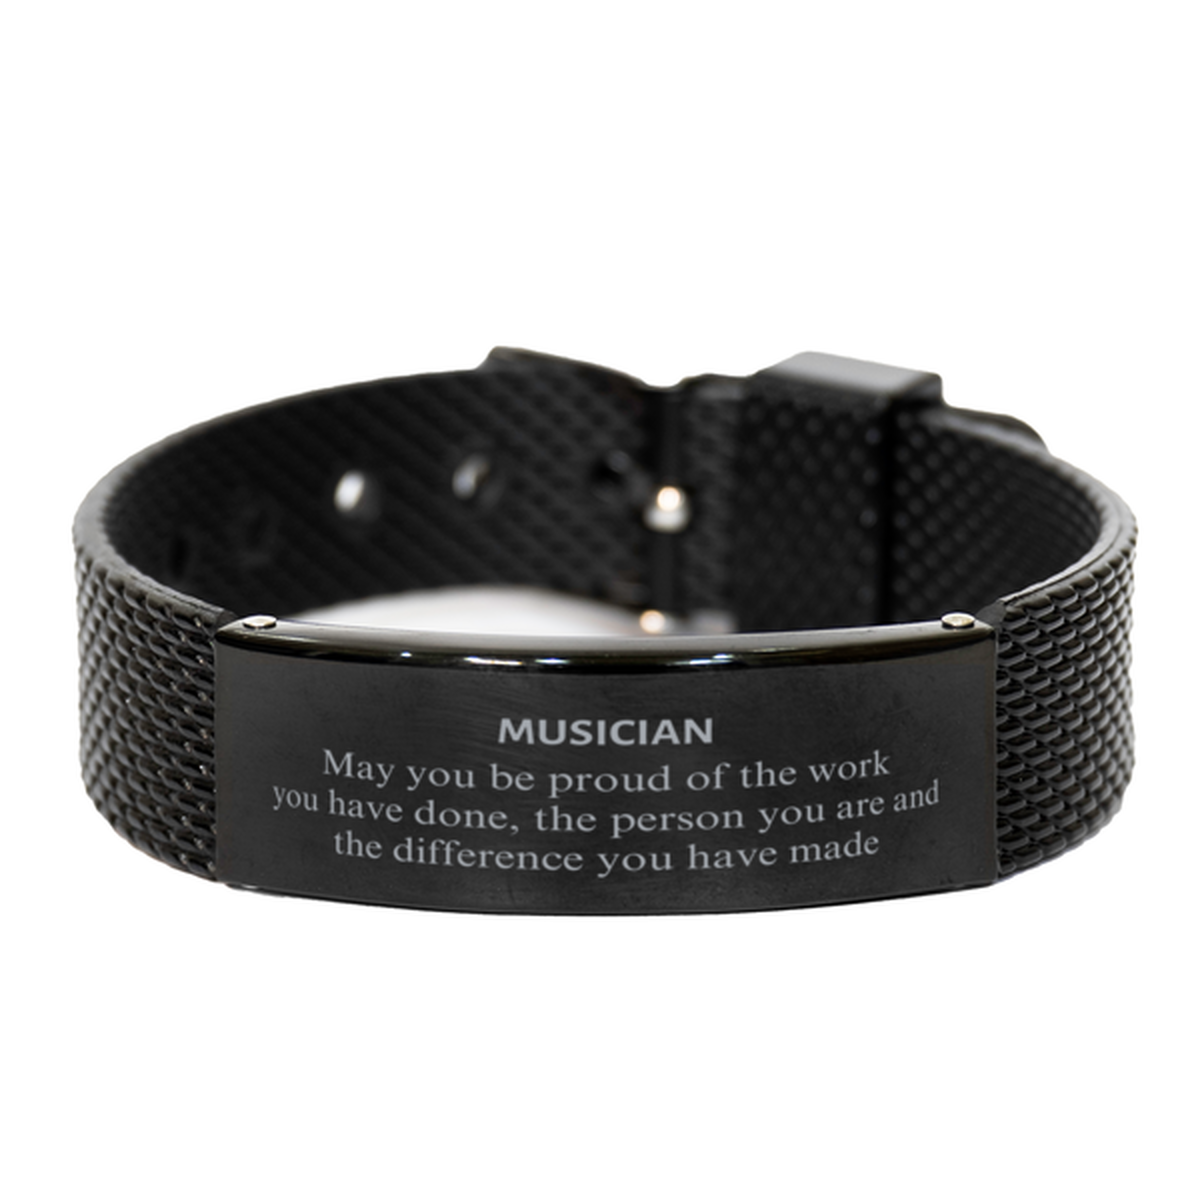 Musician May you be proud of the work you have done, Retirement Musician Black Shark Mesh Bracelet for Colleague Appreciation Gifts Amazing for Musician